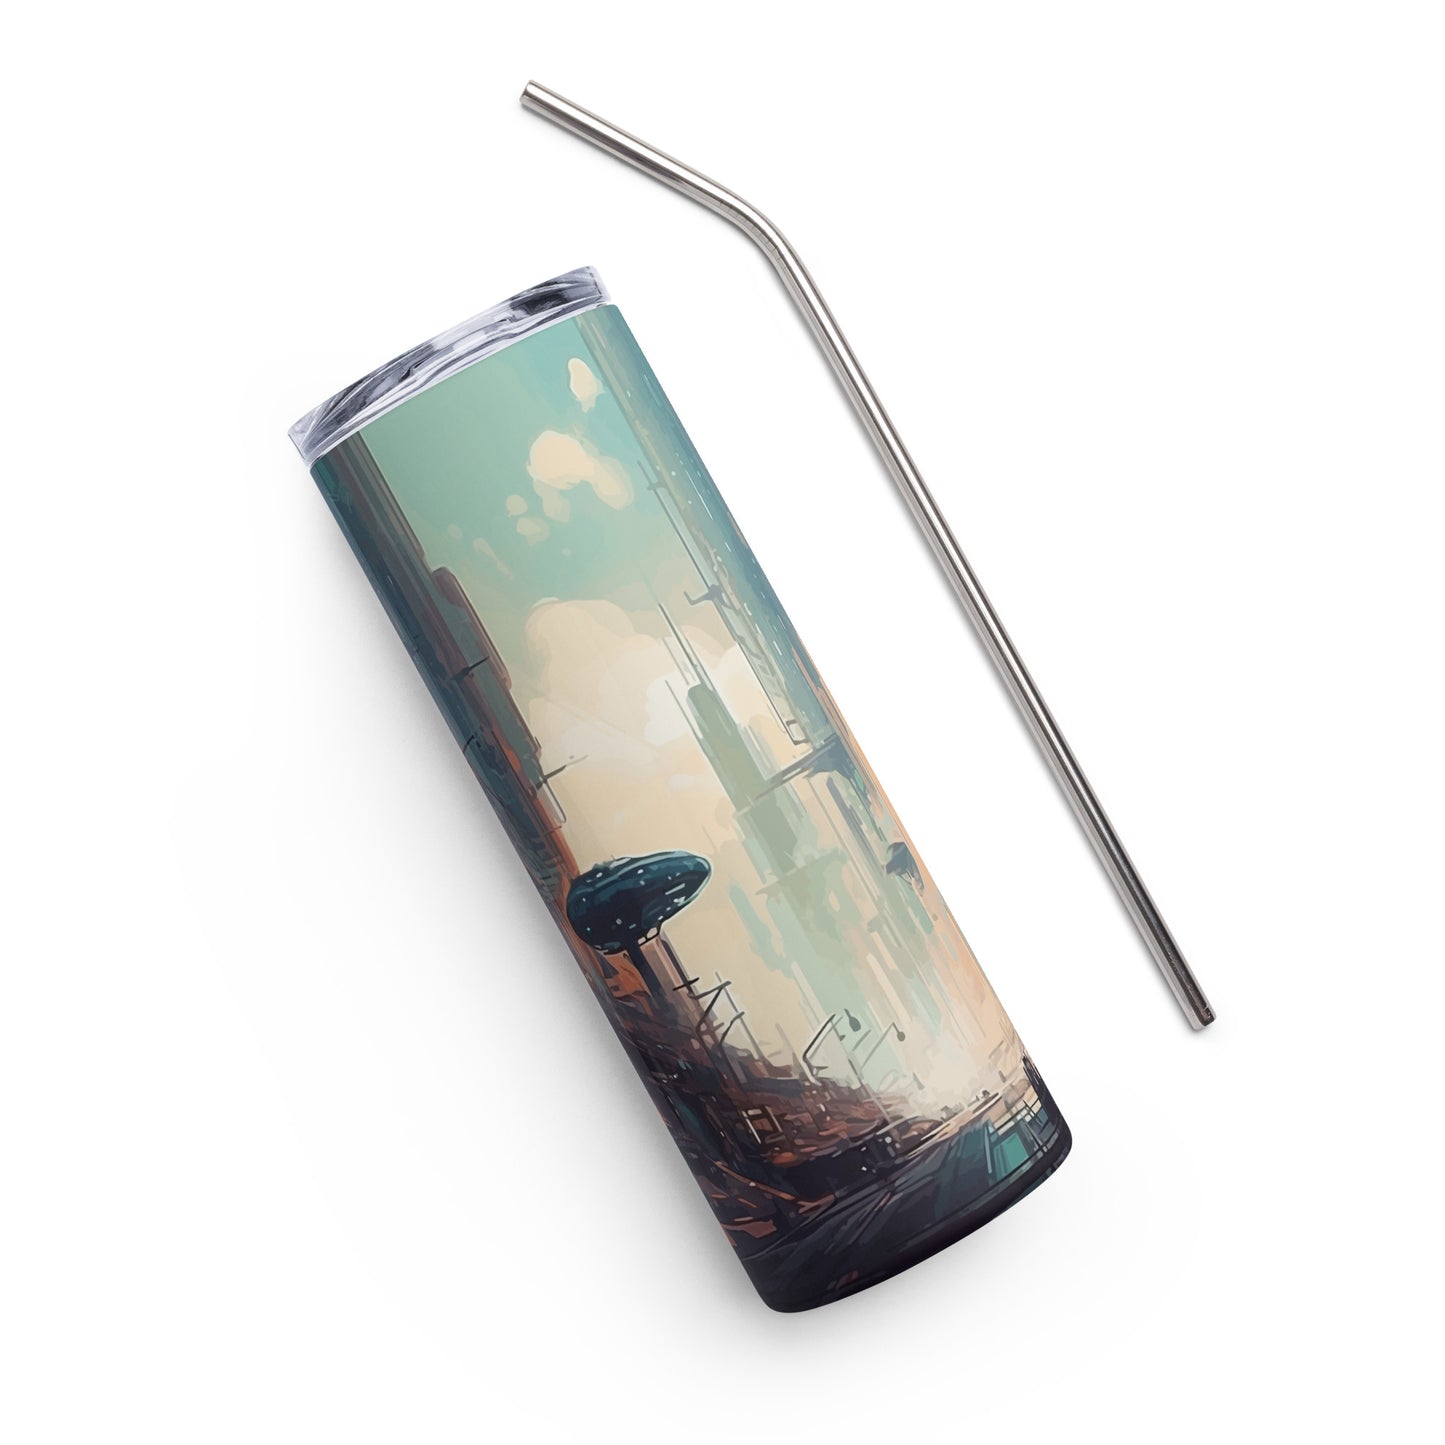 Landscape futuristic painting, Future city illustration, Skyscrapers of the future, Fantasy town, Fantasy high-tech city - Stainless steel tumbler